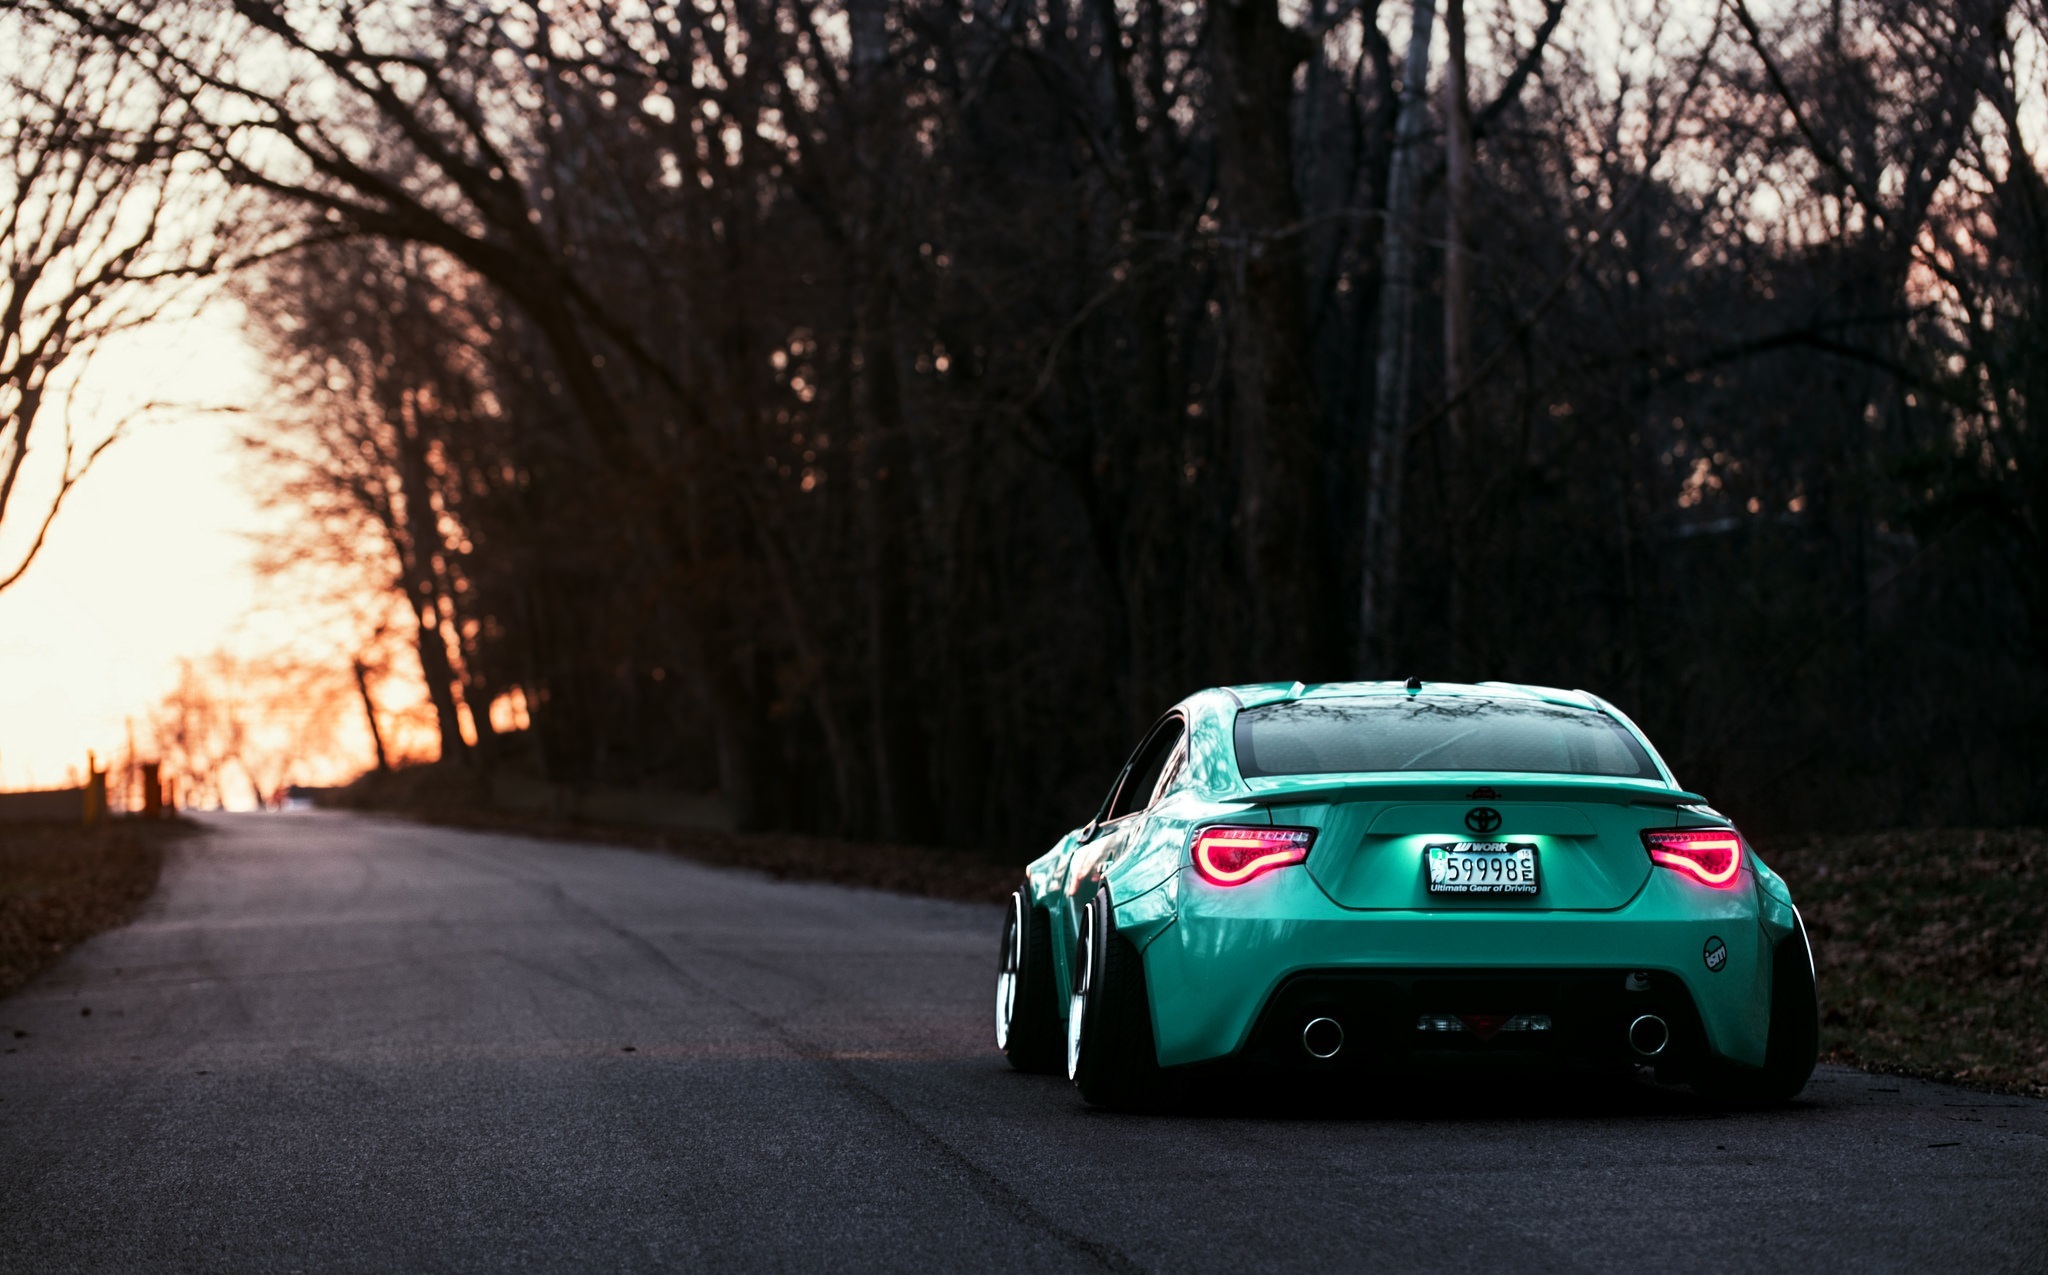 61695 Screensavers and Wallpapers Evening for phone. Download toyota, cars, evening, back view, rear view, gt86 pictures for free